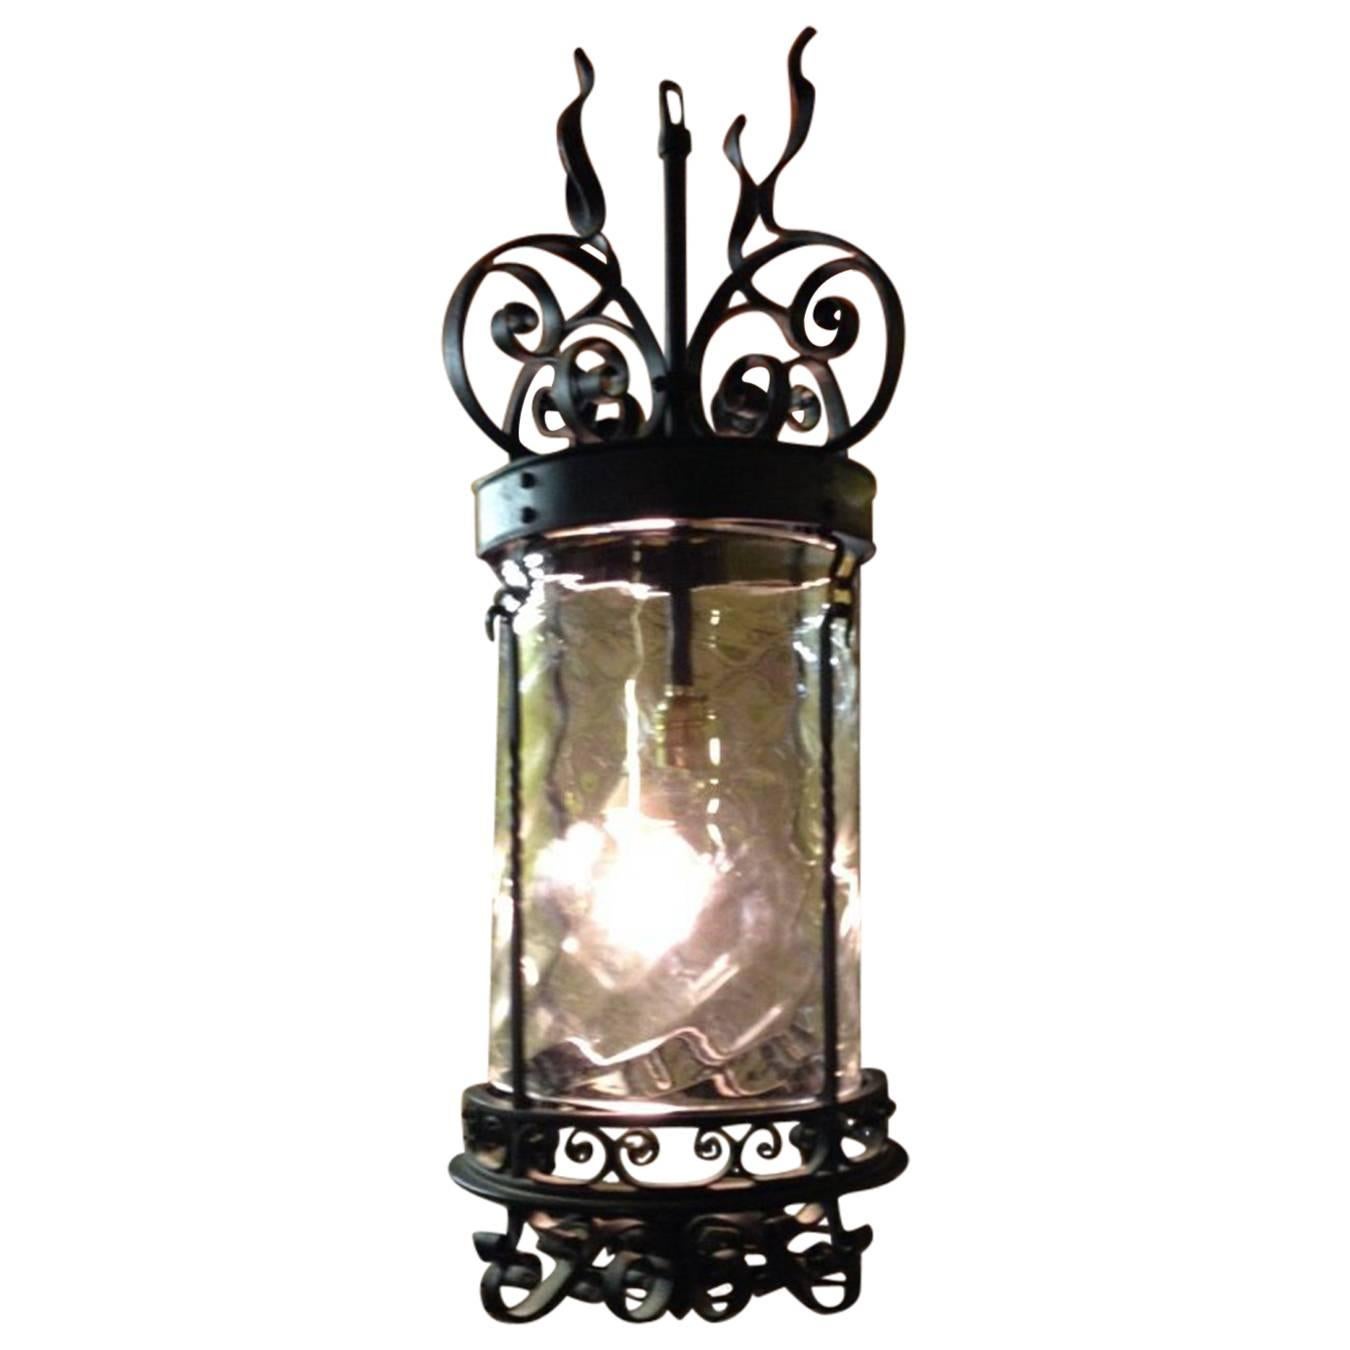 An Arts & Crafts Hand Wrought Iron Lantern with Flaming Tendrils & Dappled Shade